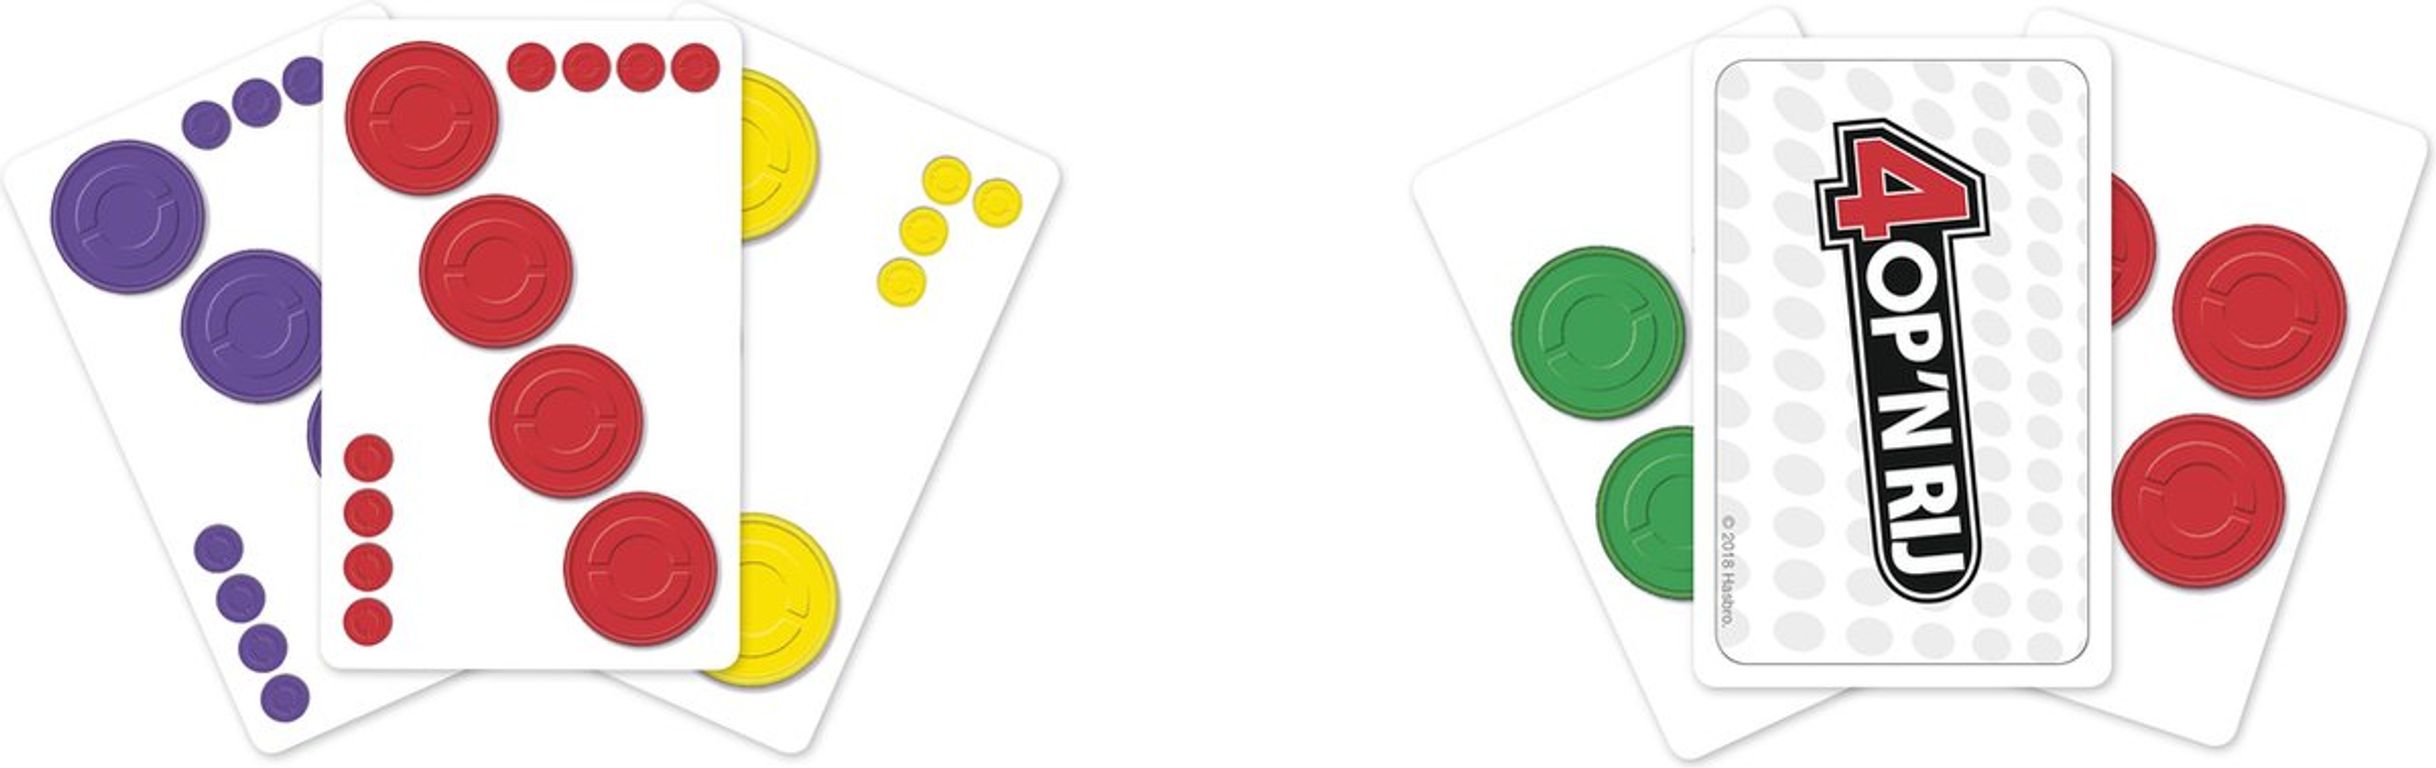 Connect 4: Card Game cards